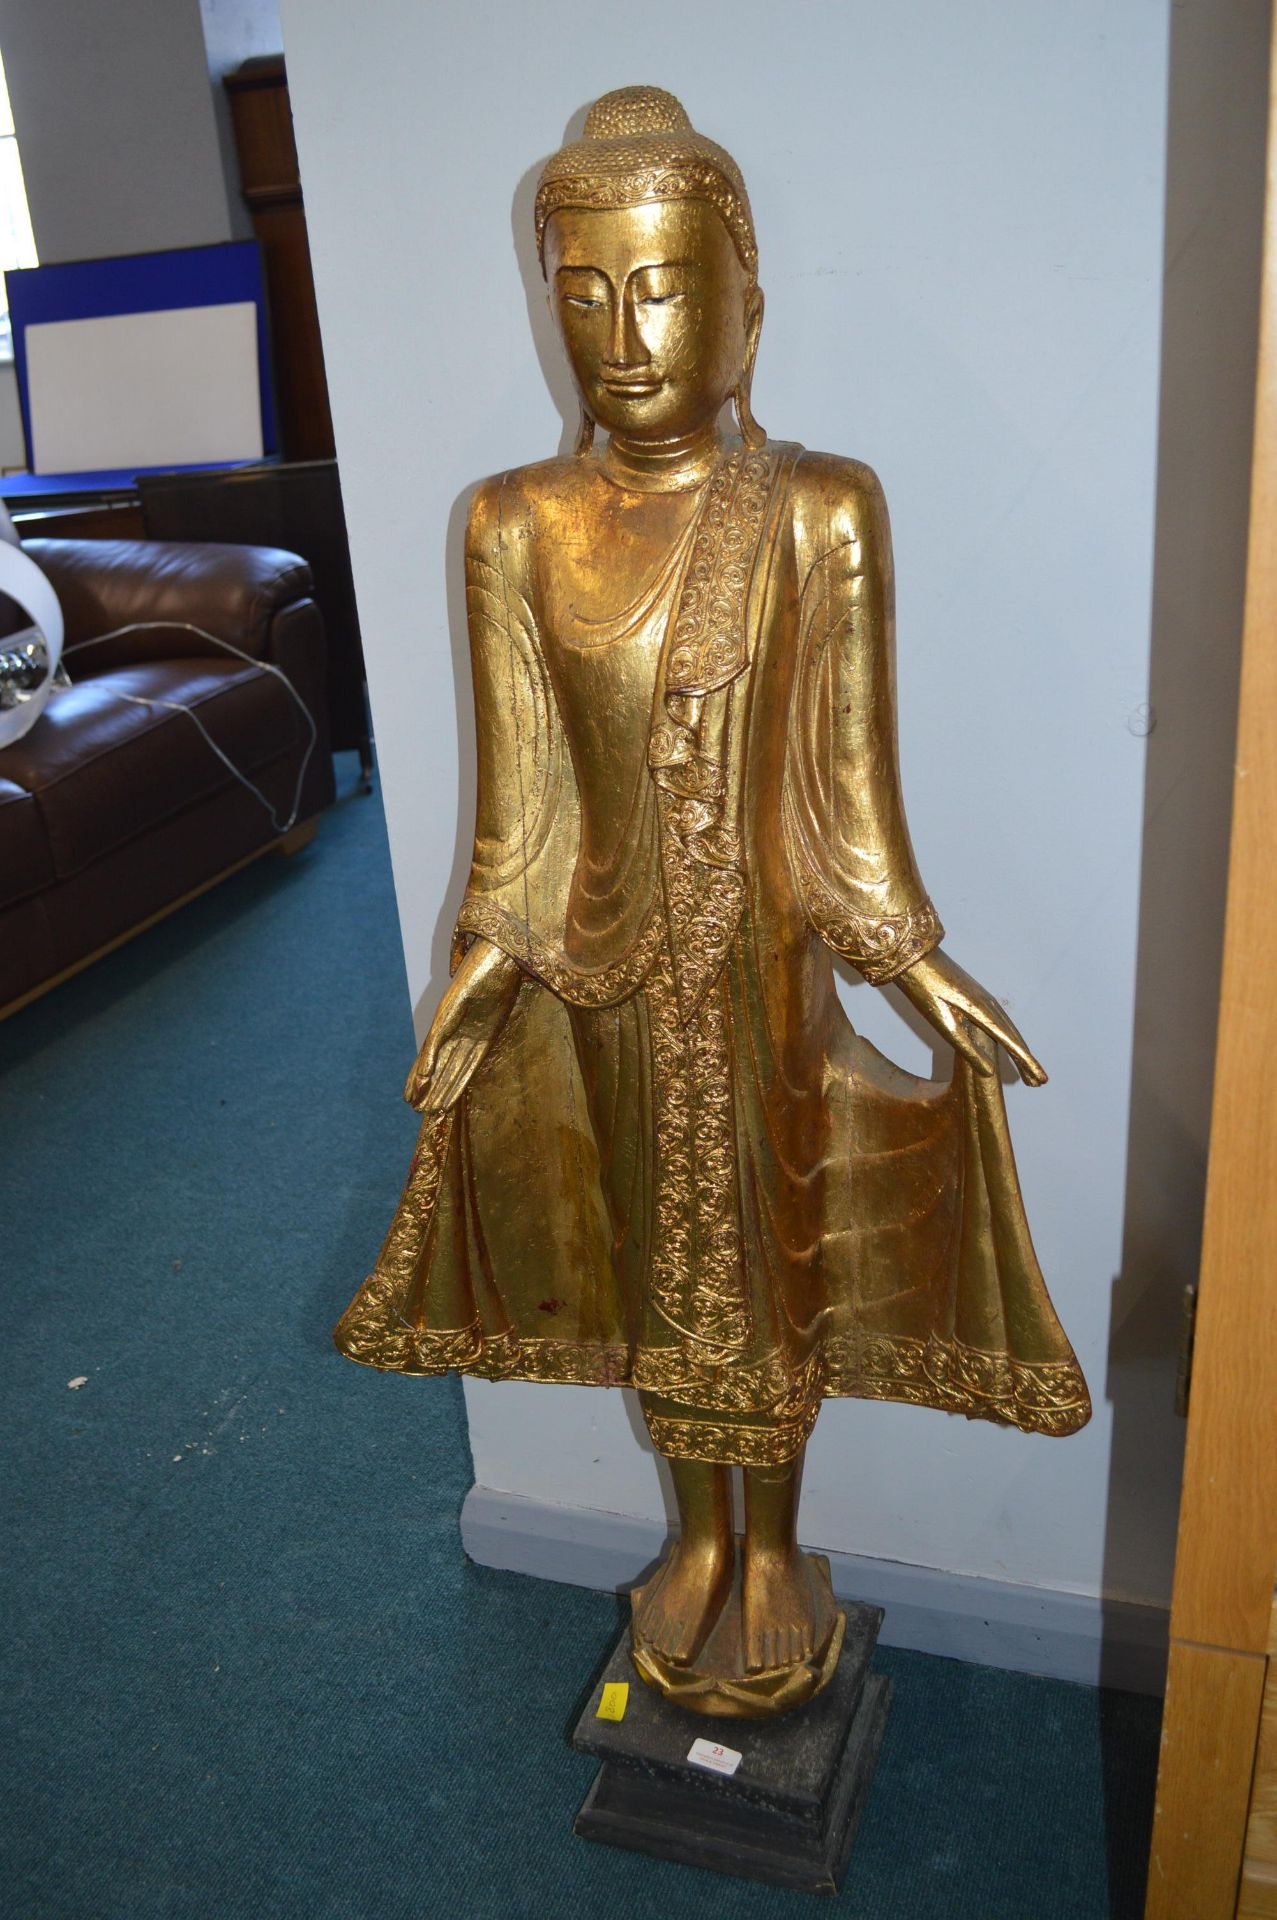 Carved Wooden Gilded Figure of a Standing Buddha 124cm tall - Image 3 of 3